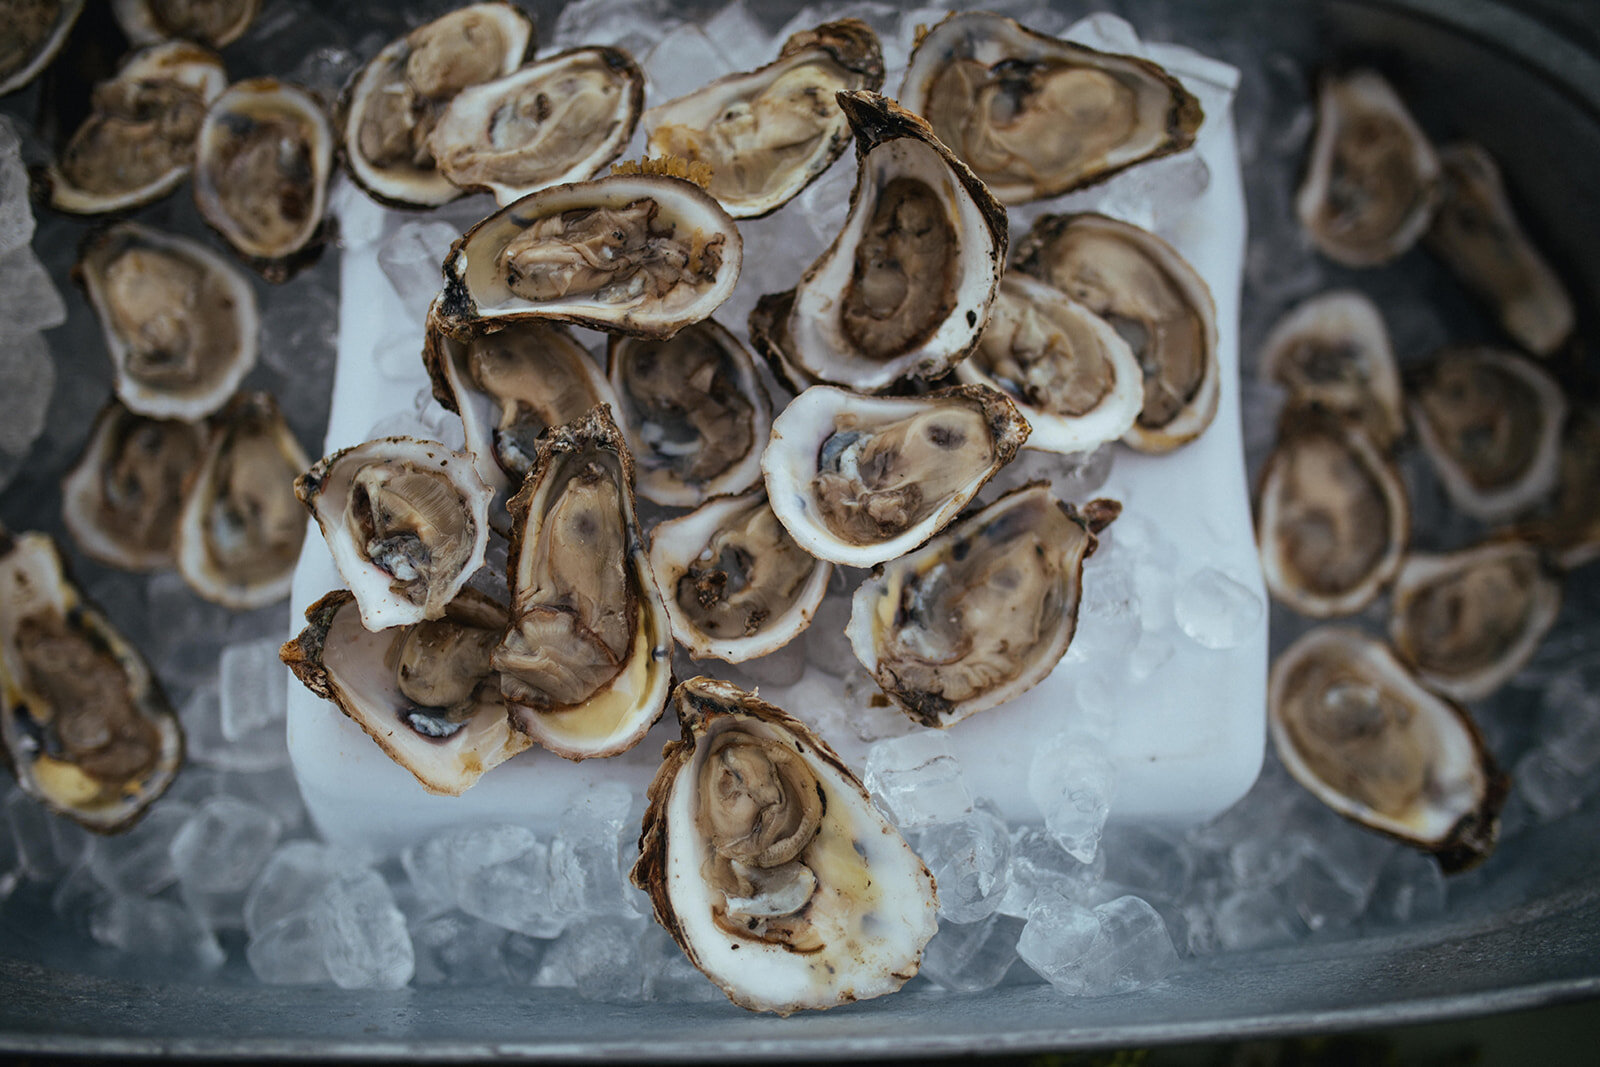 Oysters on ice in Annapolis MD Shawnee Custalow Queer Wedding Photography